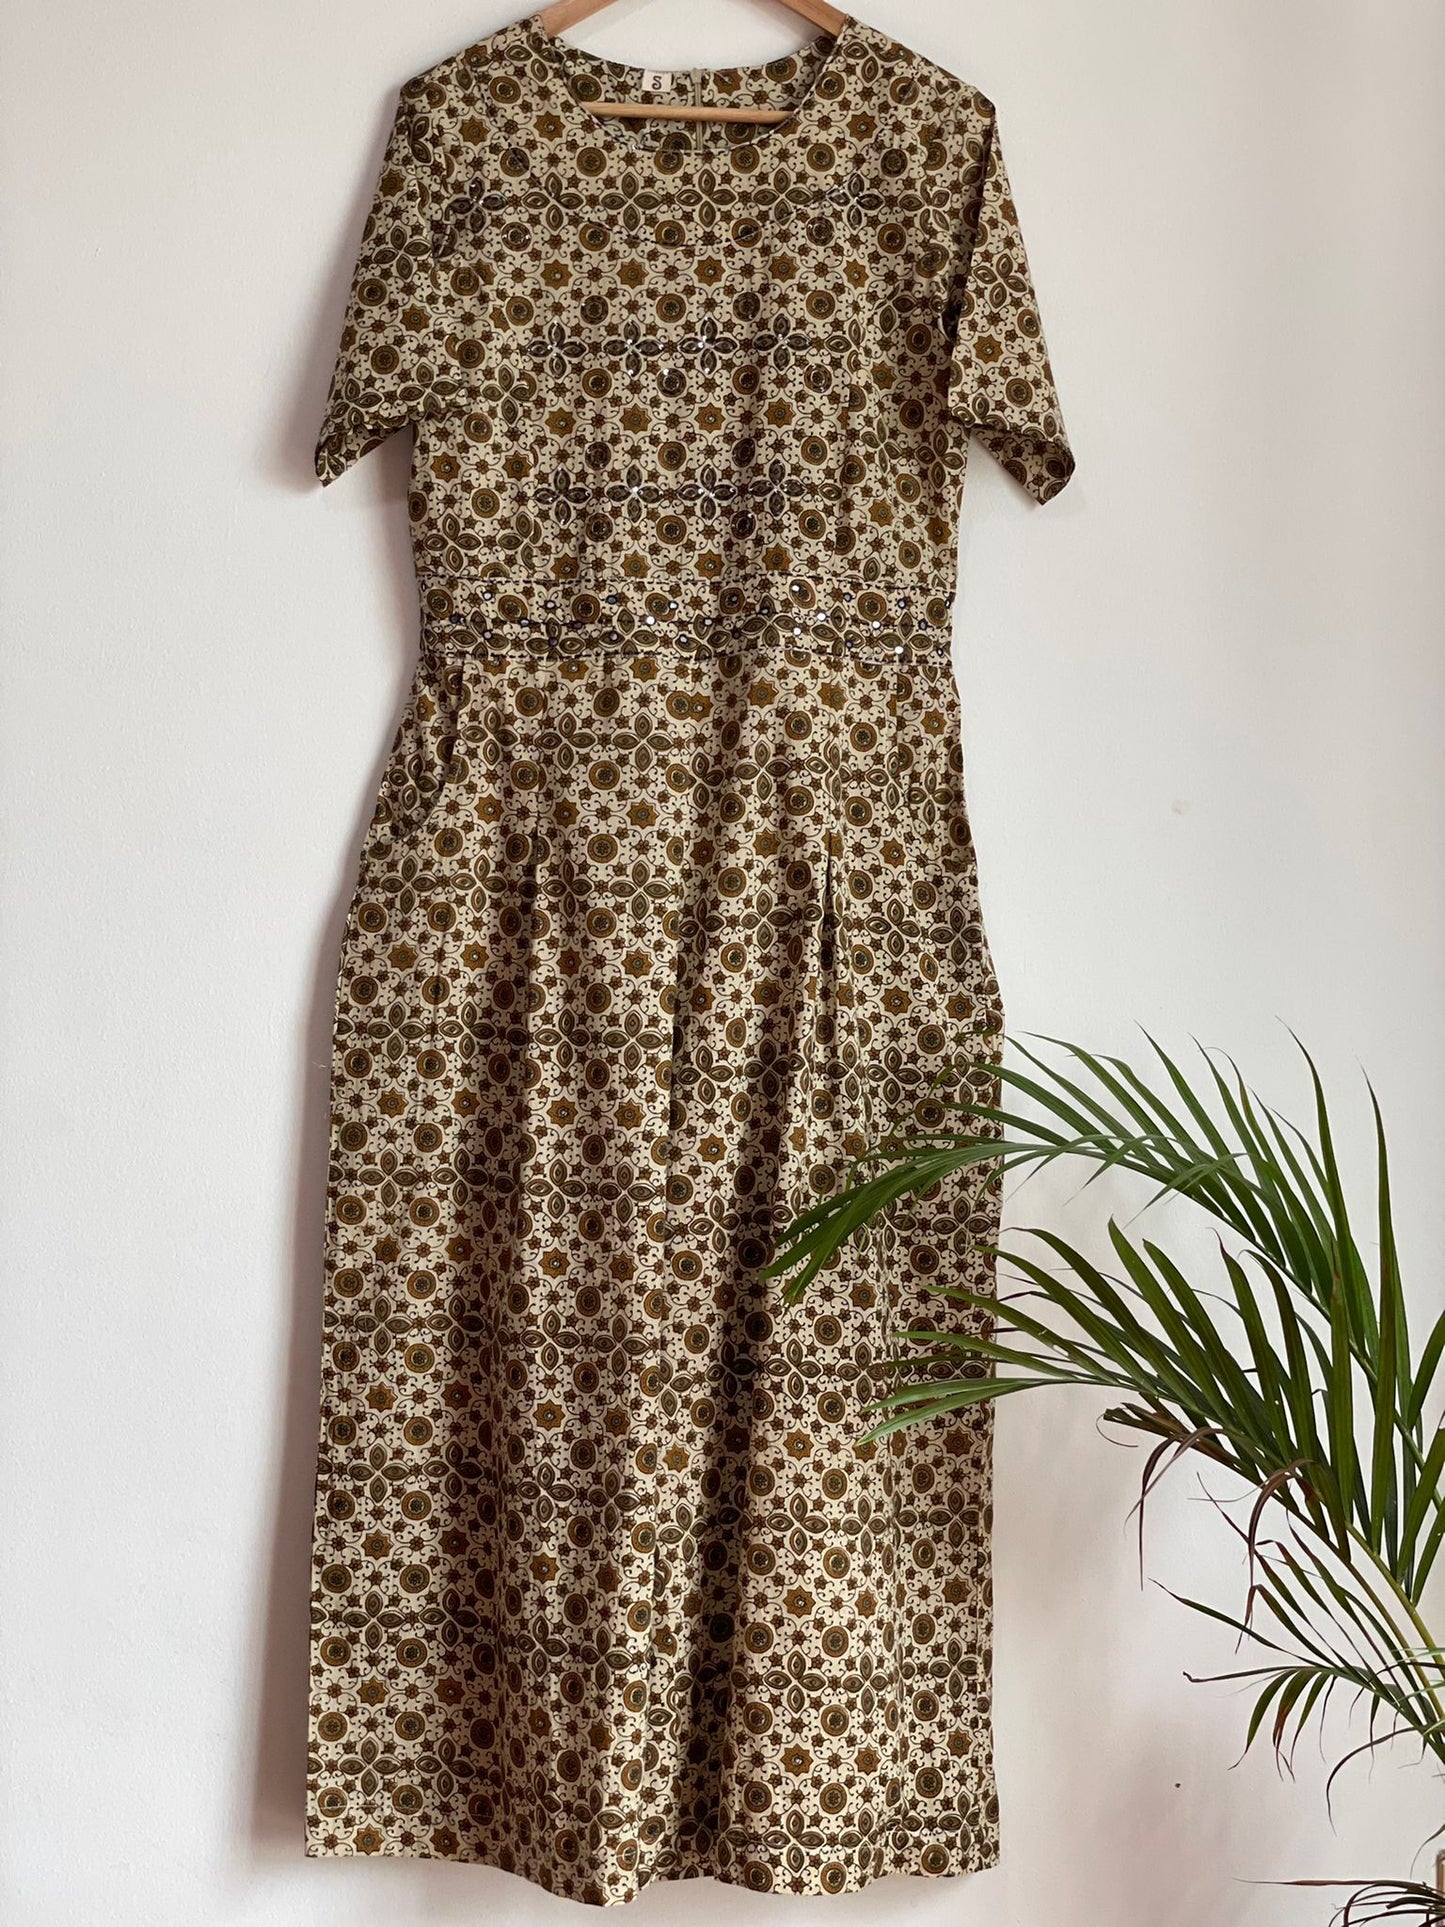 affordable and high quality jumpsuit for women made from 100% cotton blockprinted by hand